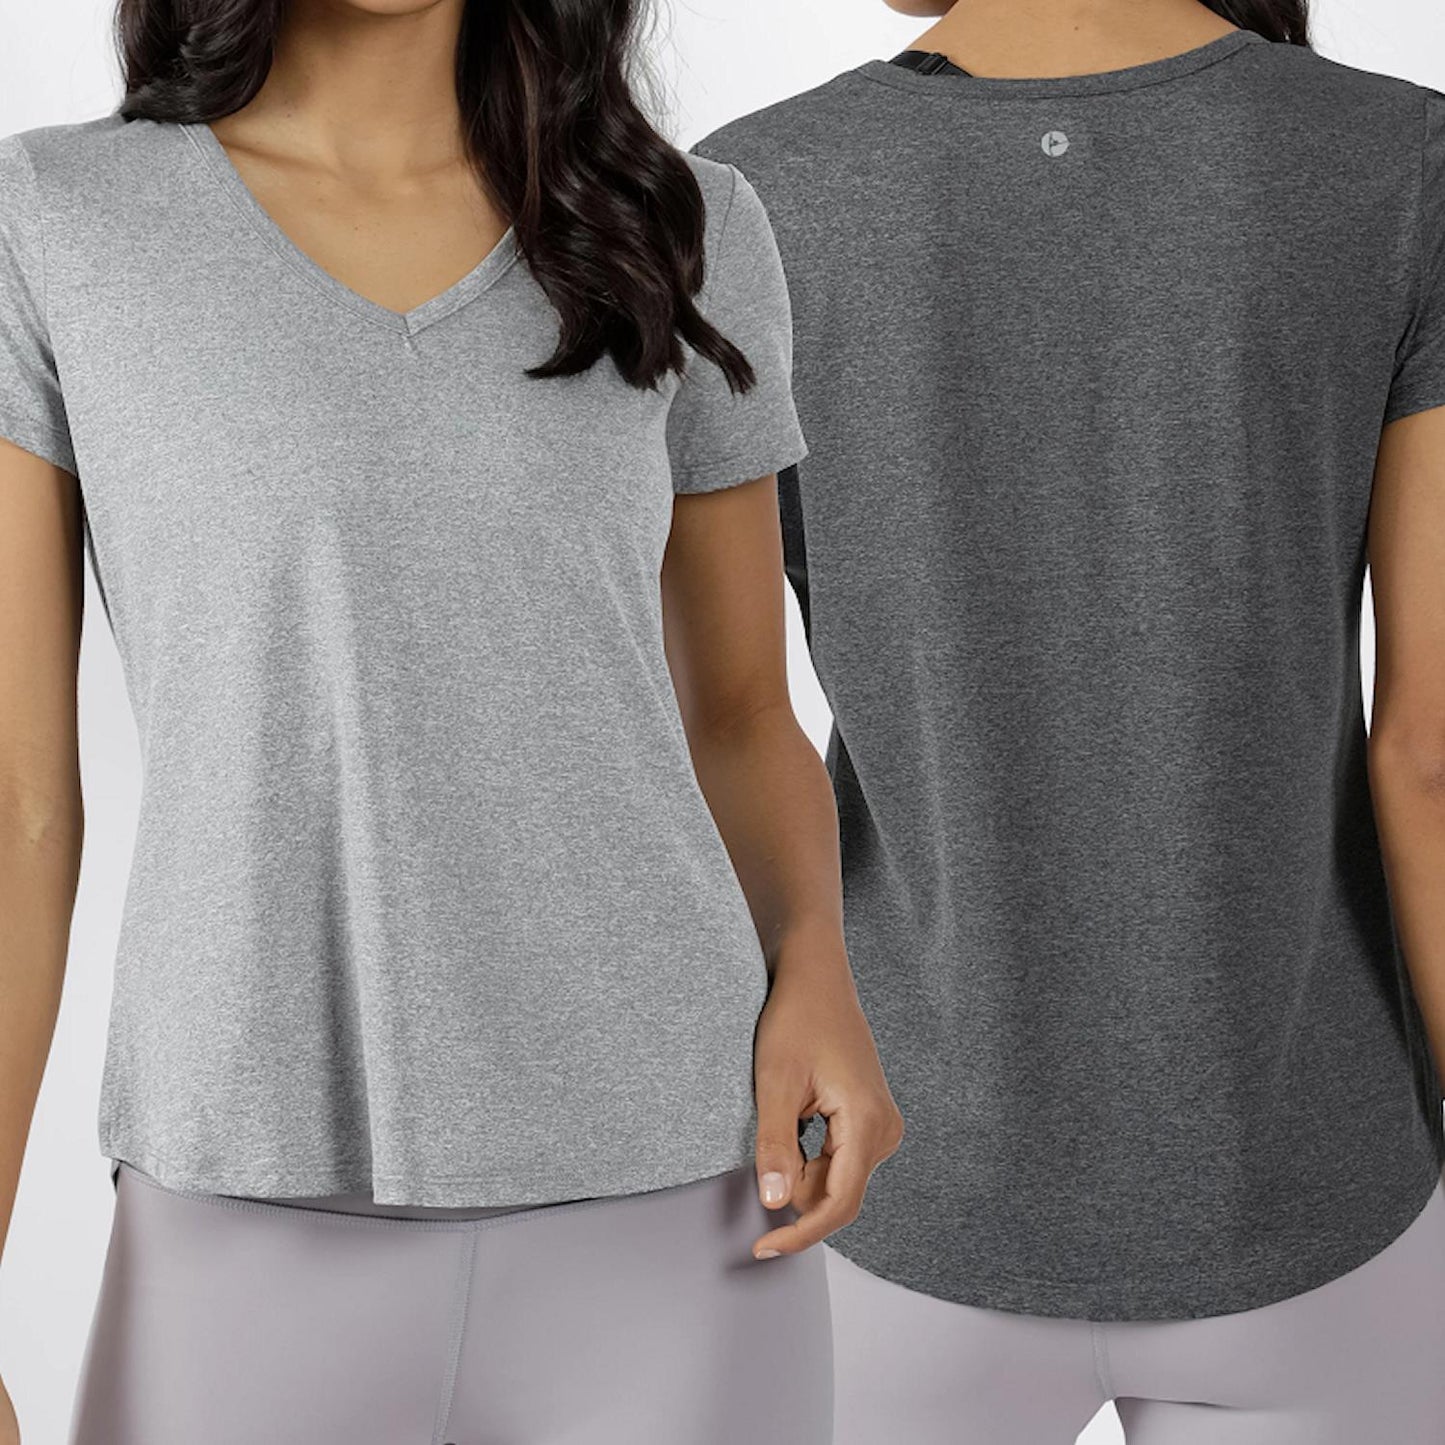 90 Degree by Reflex 2 Pack Basic Active Workout T-shirts Heather Grays